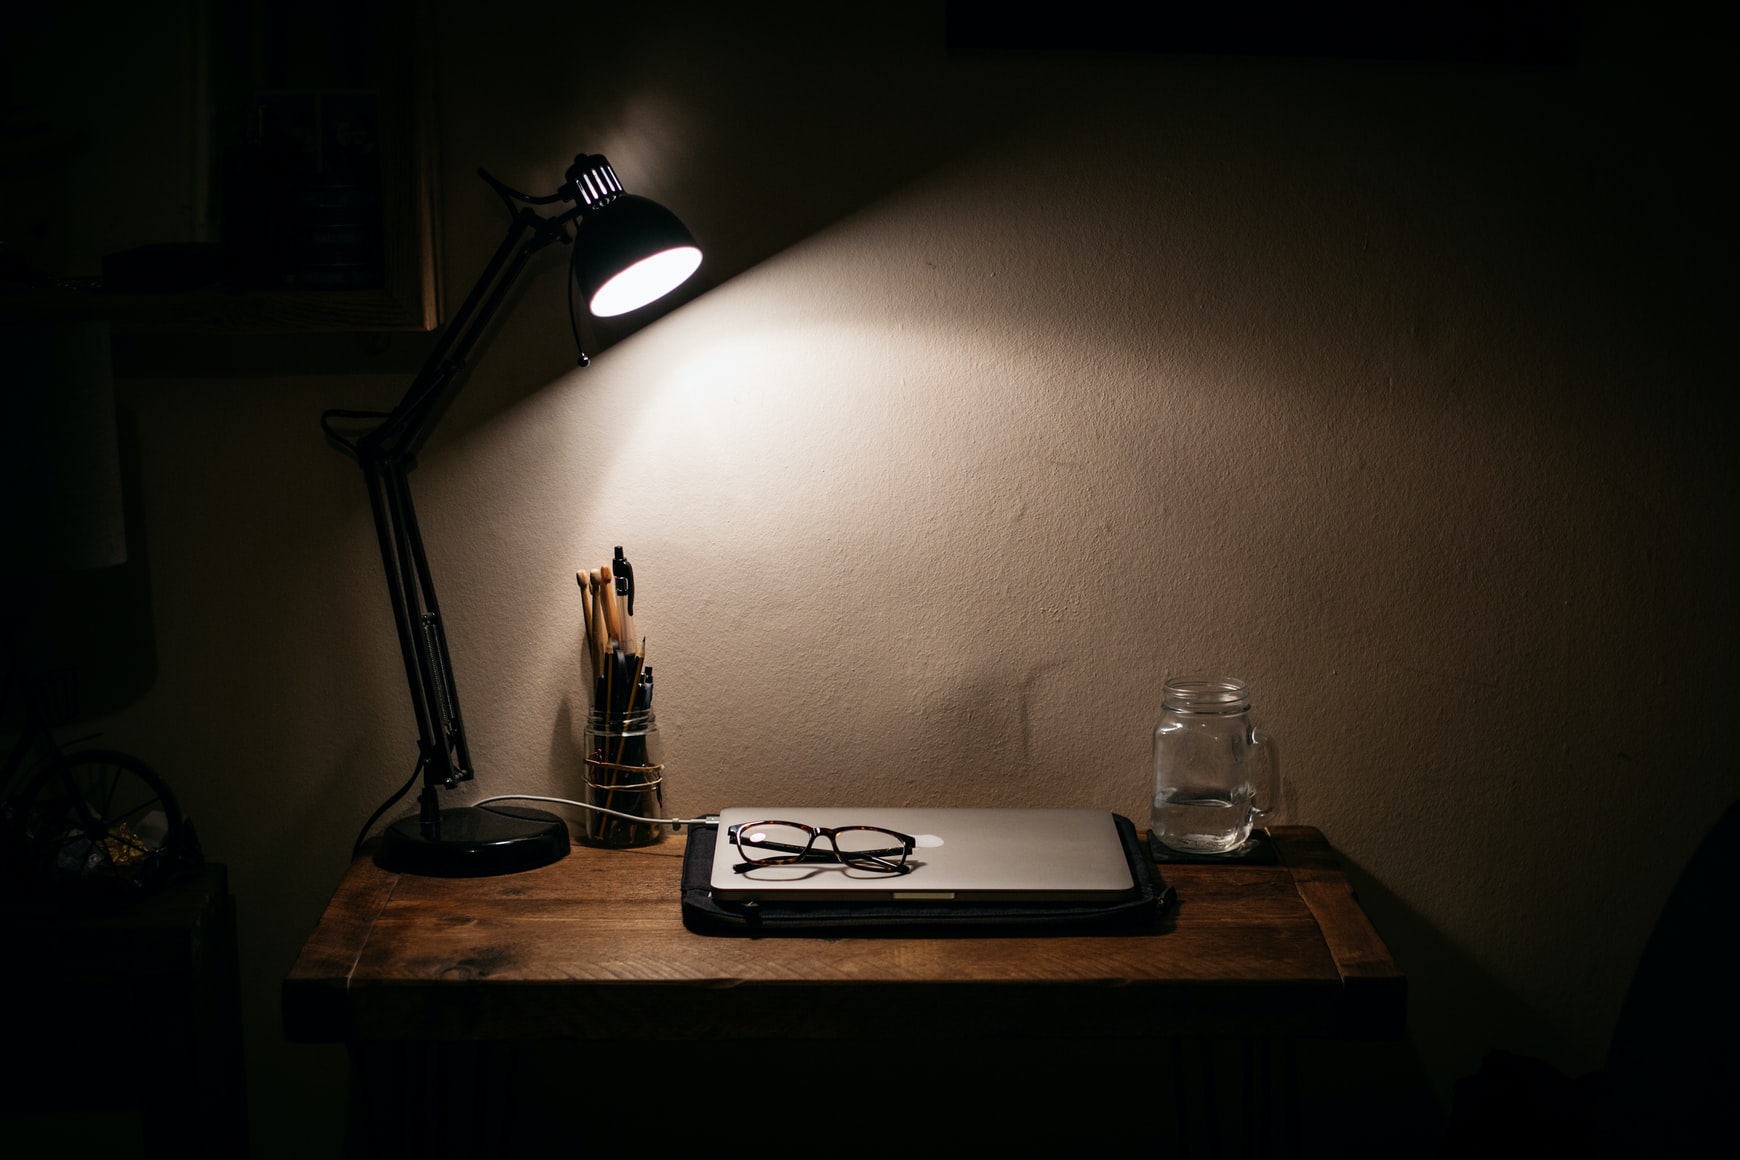 Work tools on a desk lit by a lamp